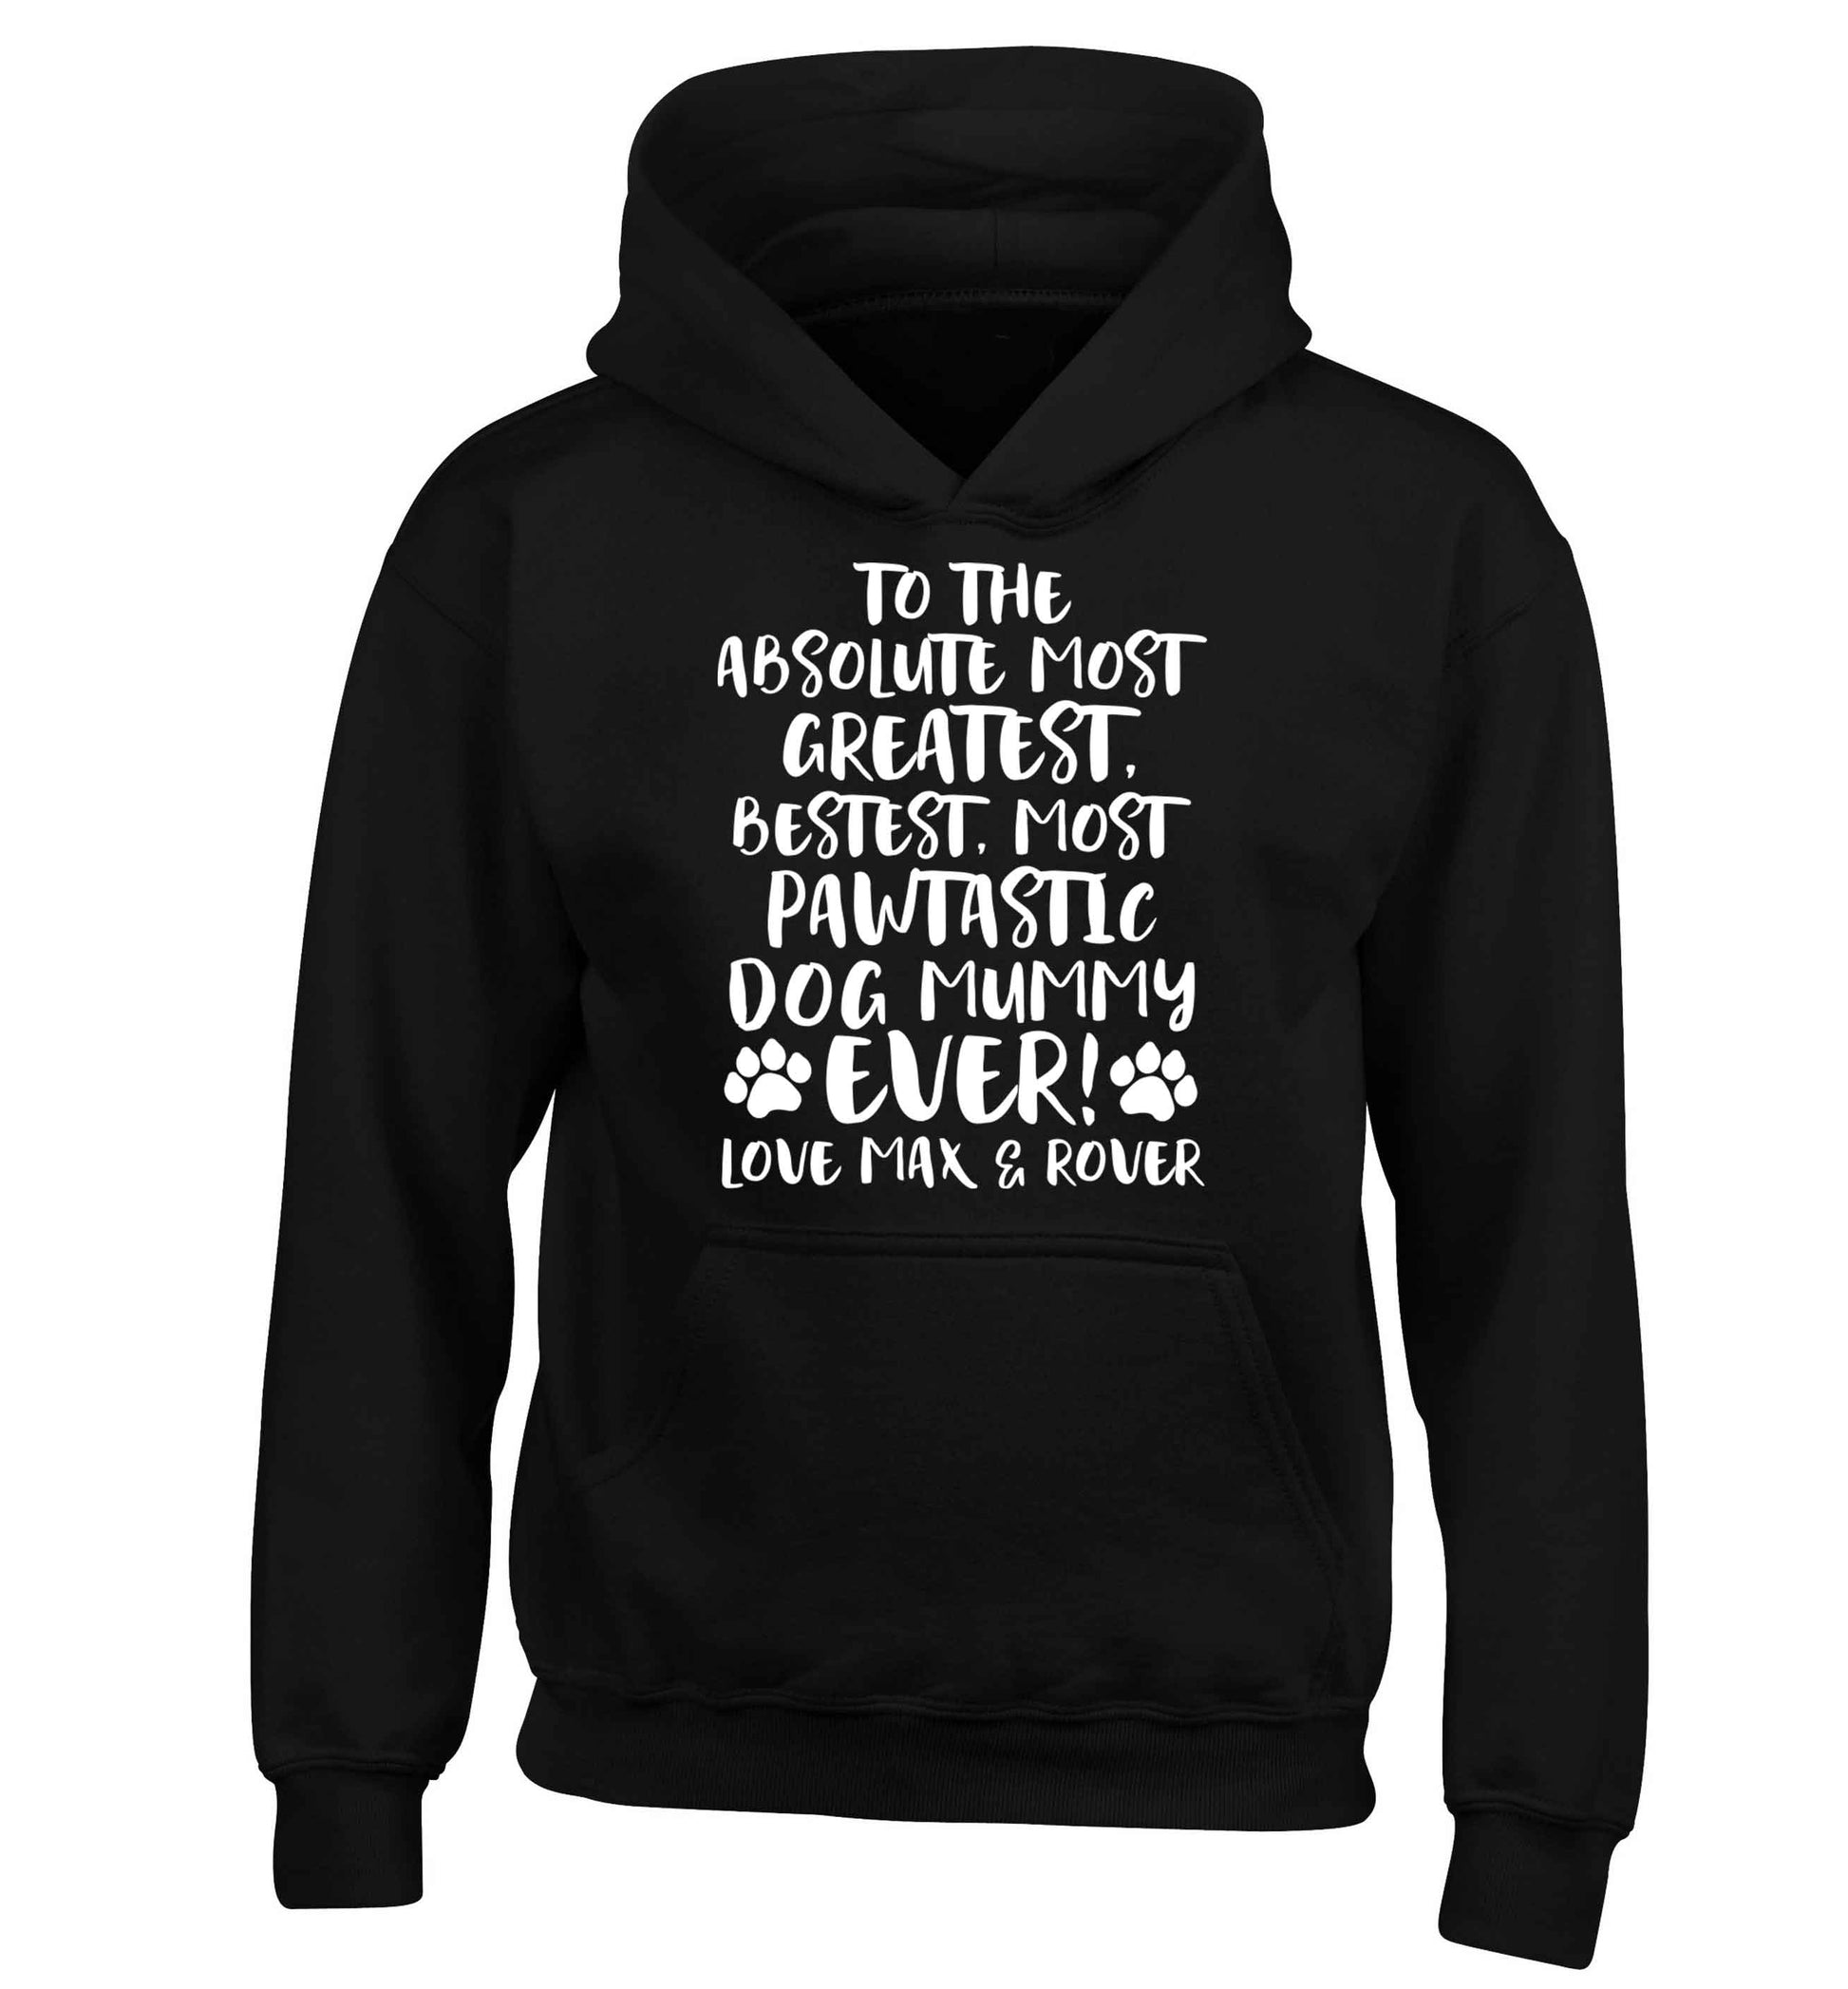 Personalsied to the most pawtastic dog mummy ever children's black hoodie 12-13 Years